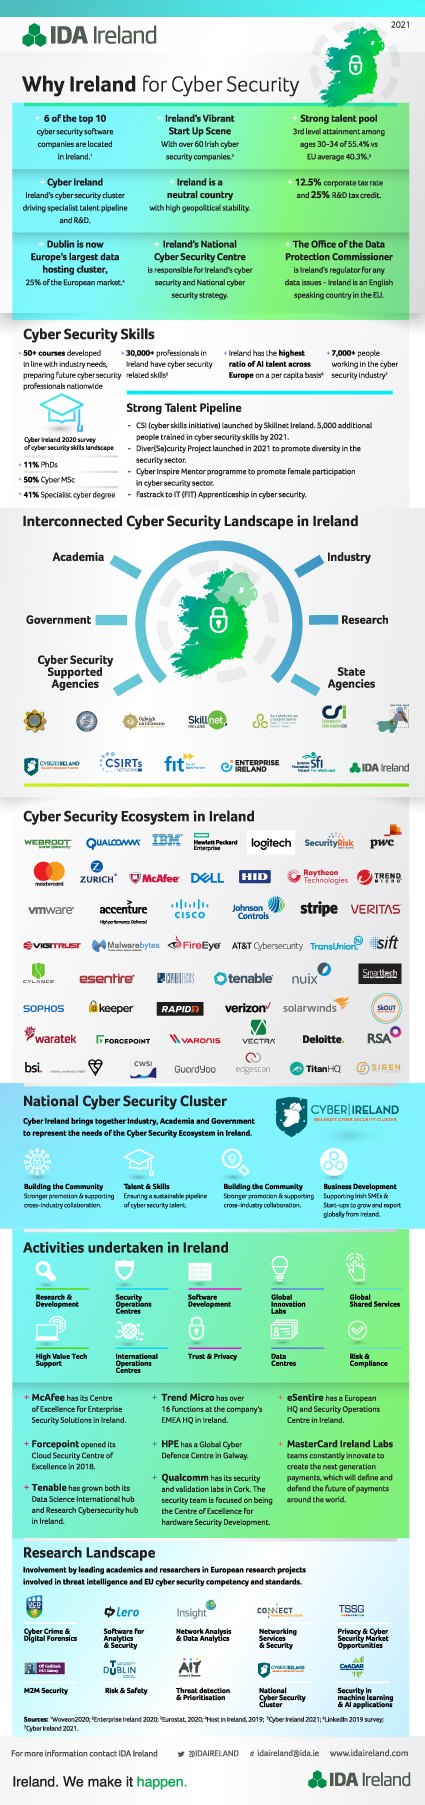 Why Ireland For Cyber Security